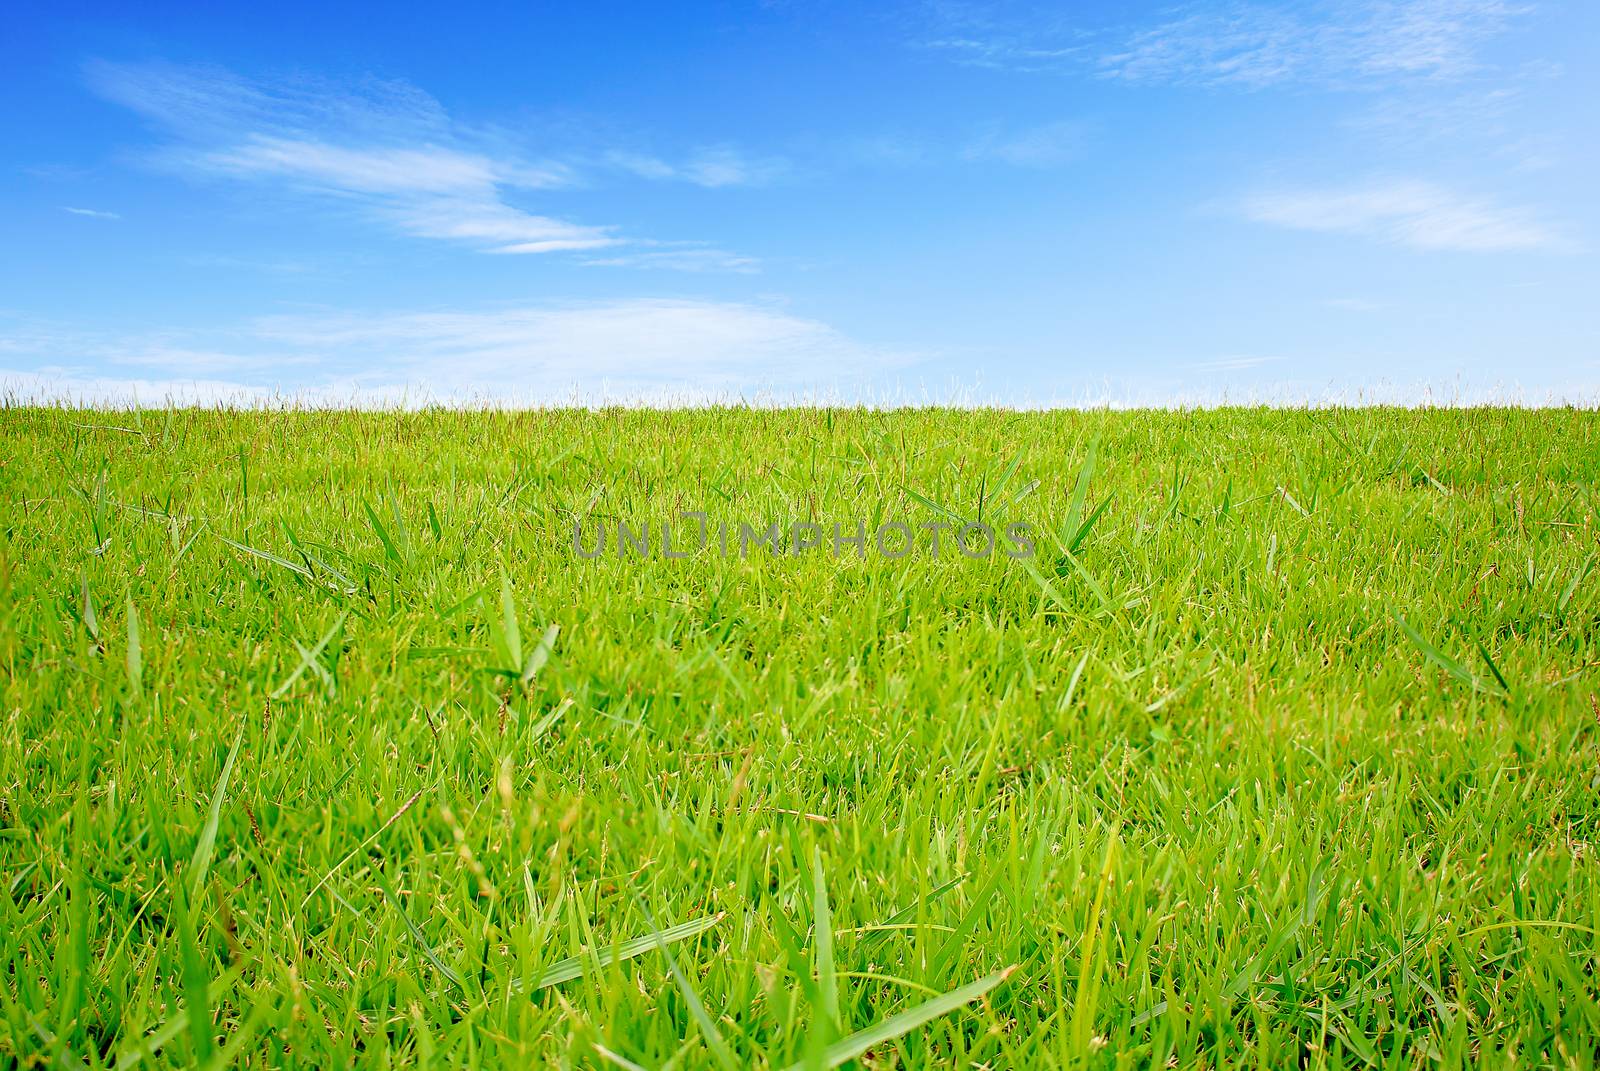 Green field under blue clouds sky, Beauty nature background.